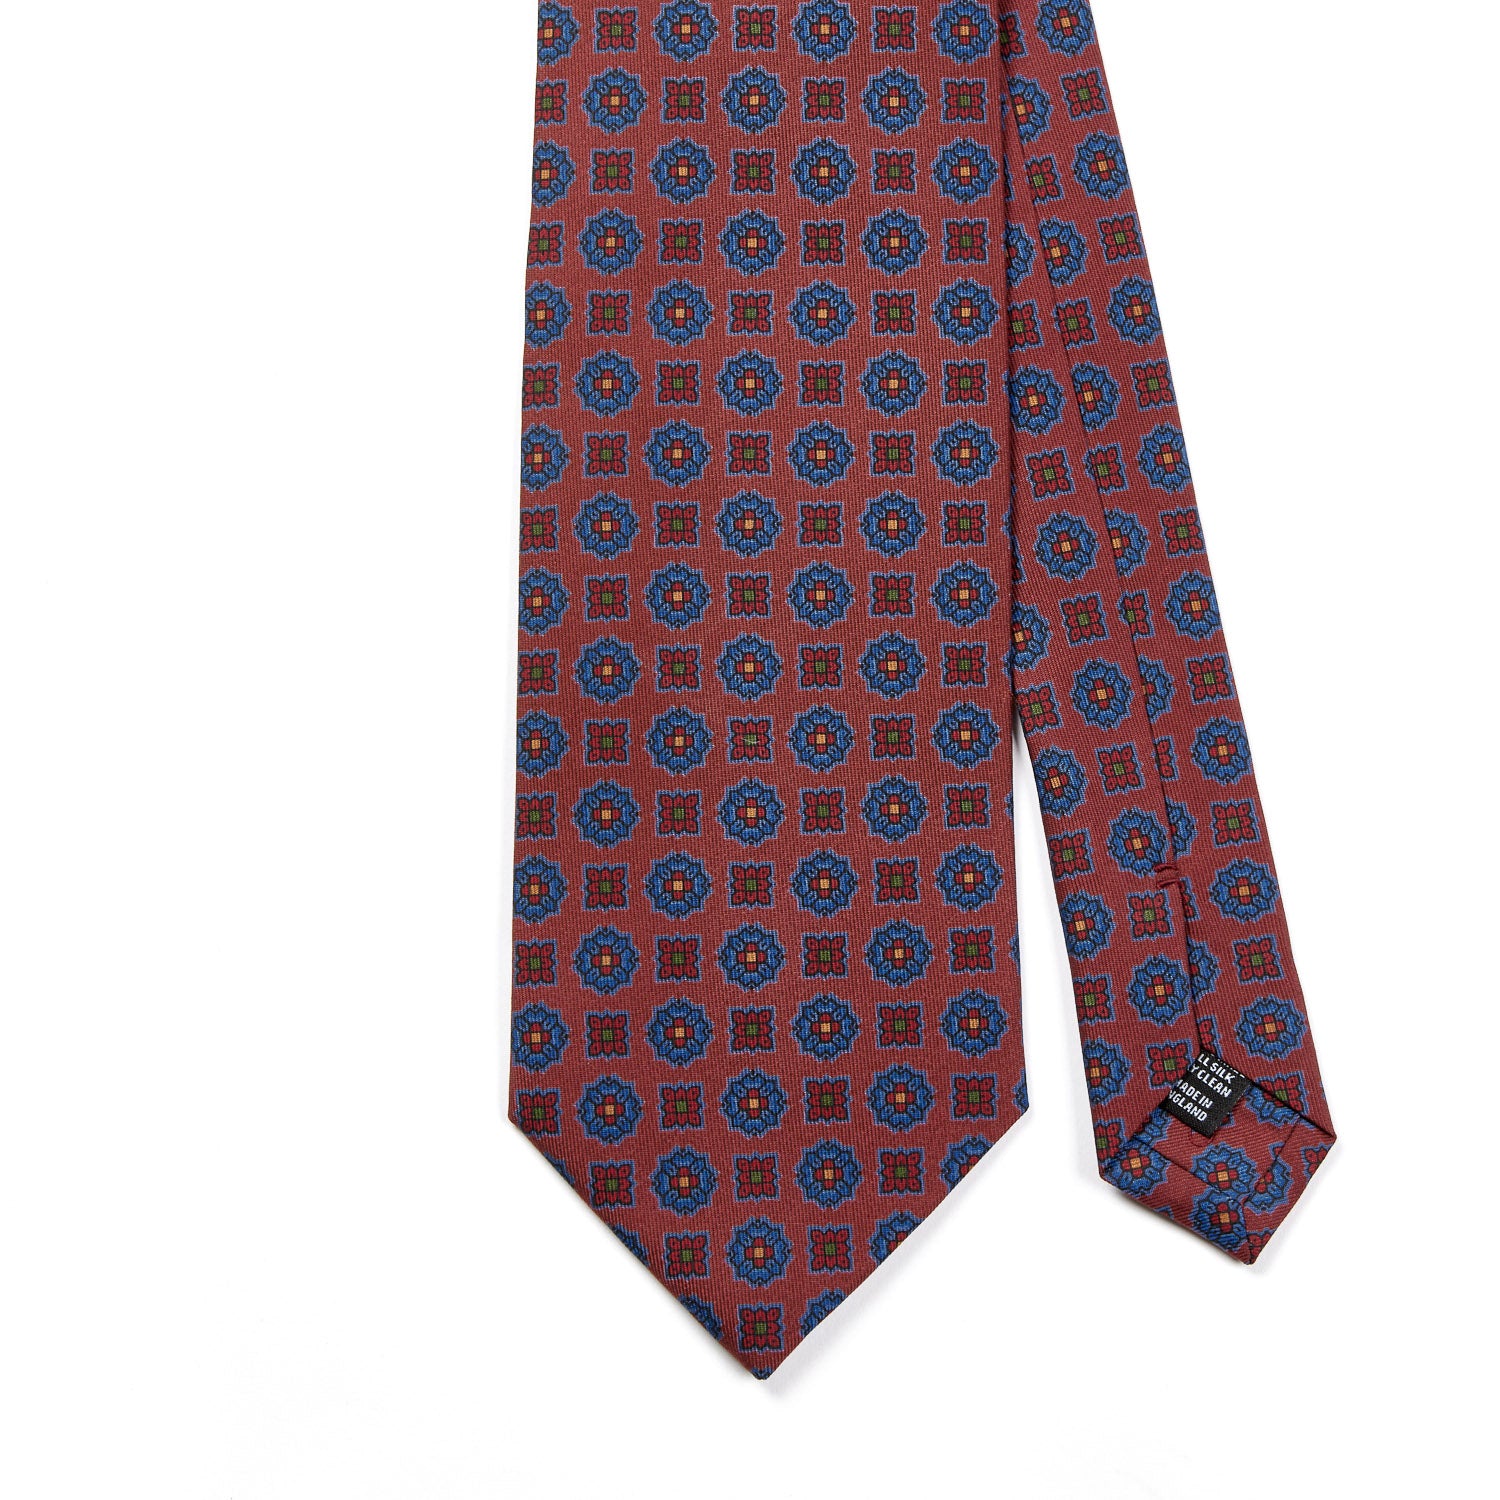 A Sovereign Grade Rust Floral Diamond Ancient Madder tie with blue and red circles on it, by KirbyAllison.com.